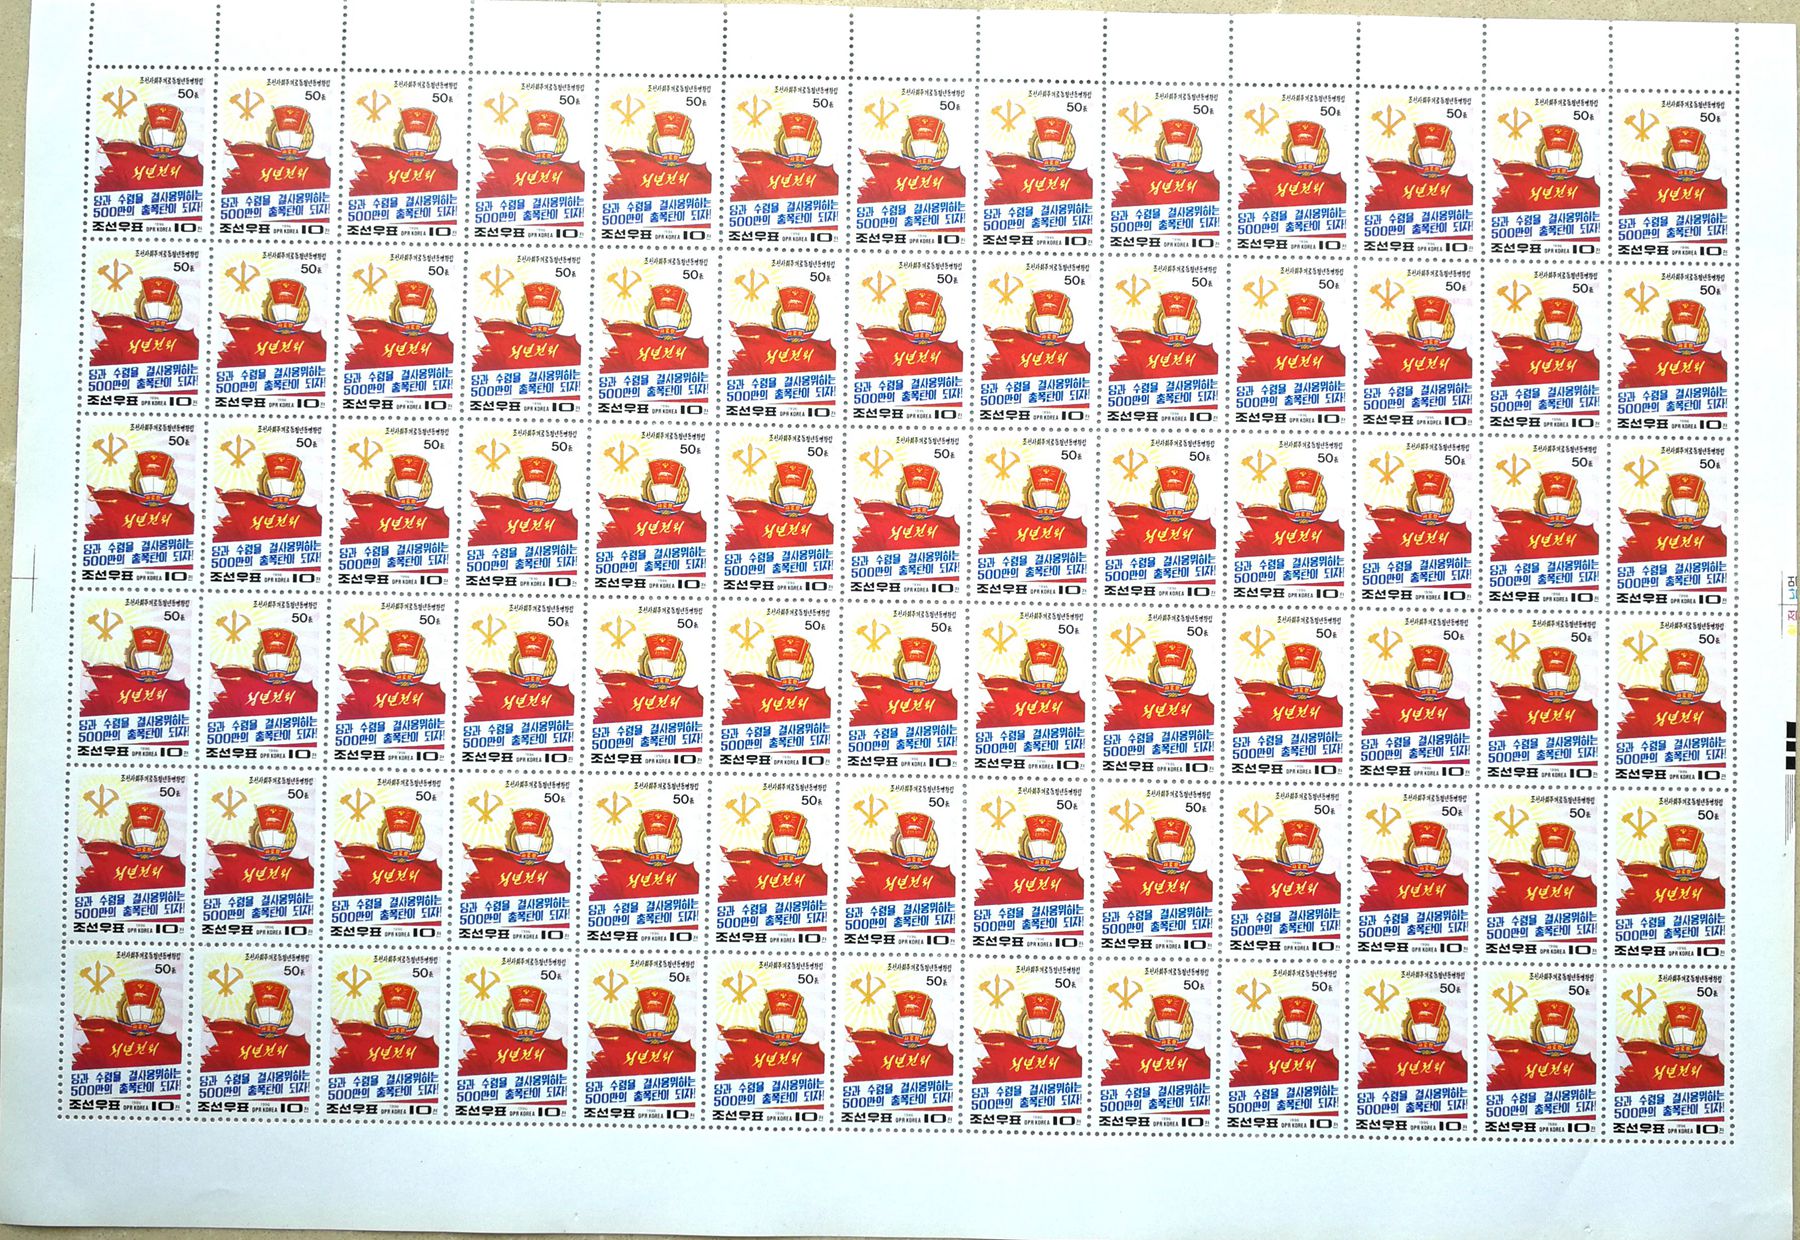 L4609, Korea "League of Socialist Working Youth", Full Sheet 78 Pcs Stamps, 1996 - Click Image to Close